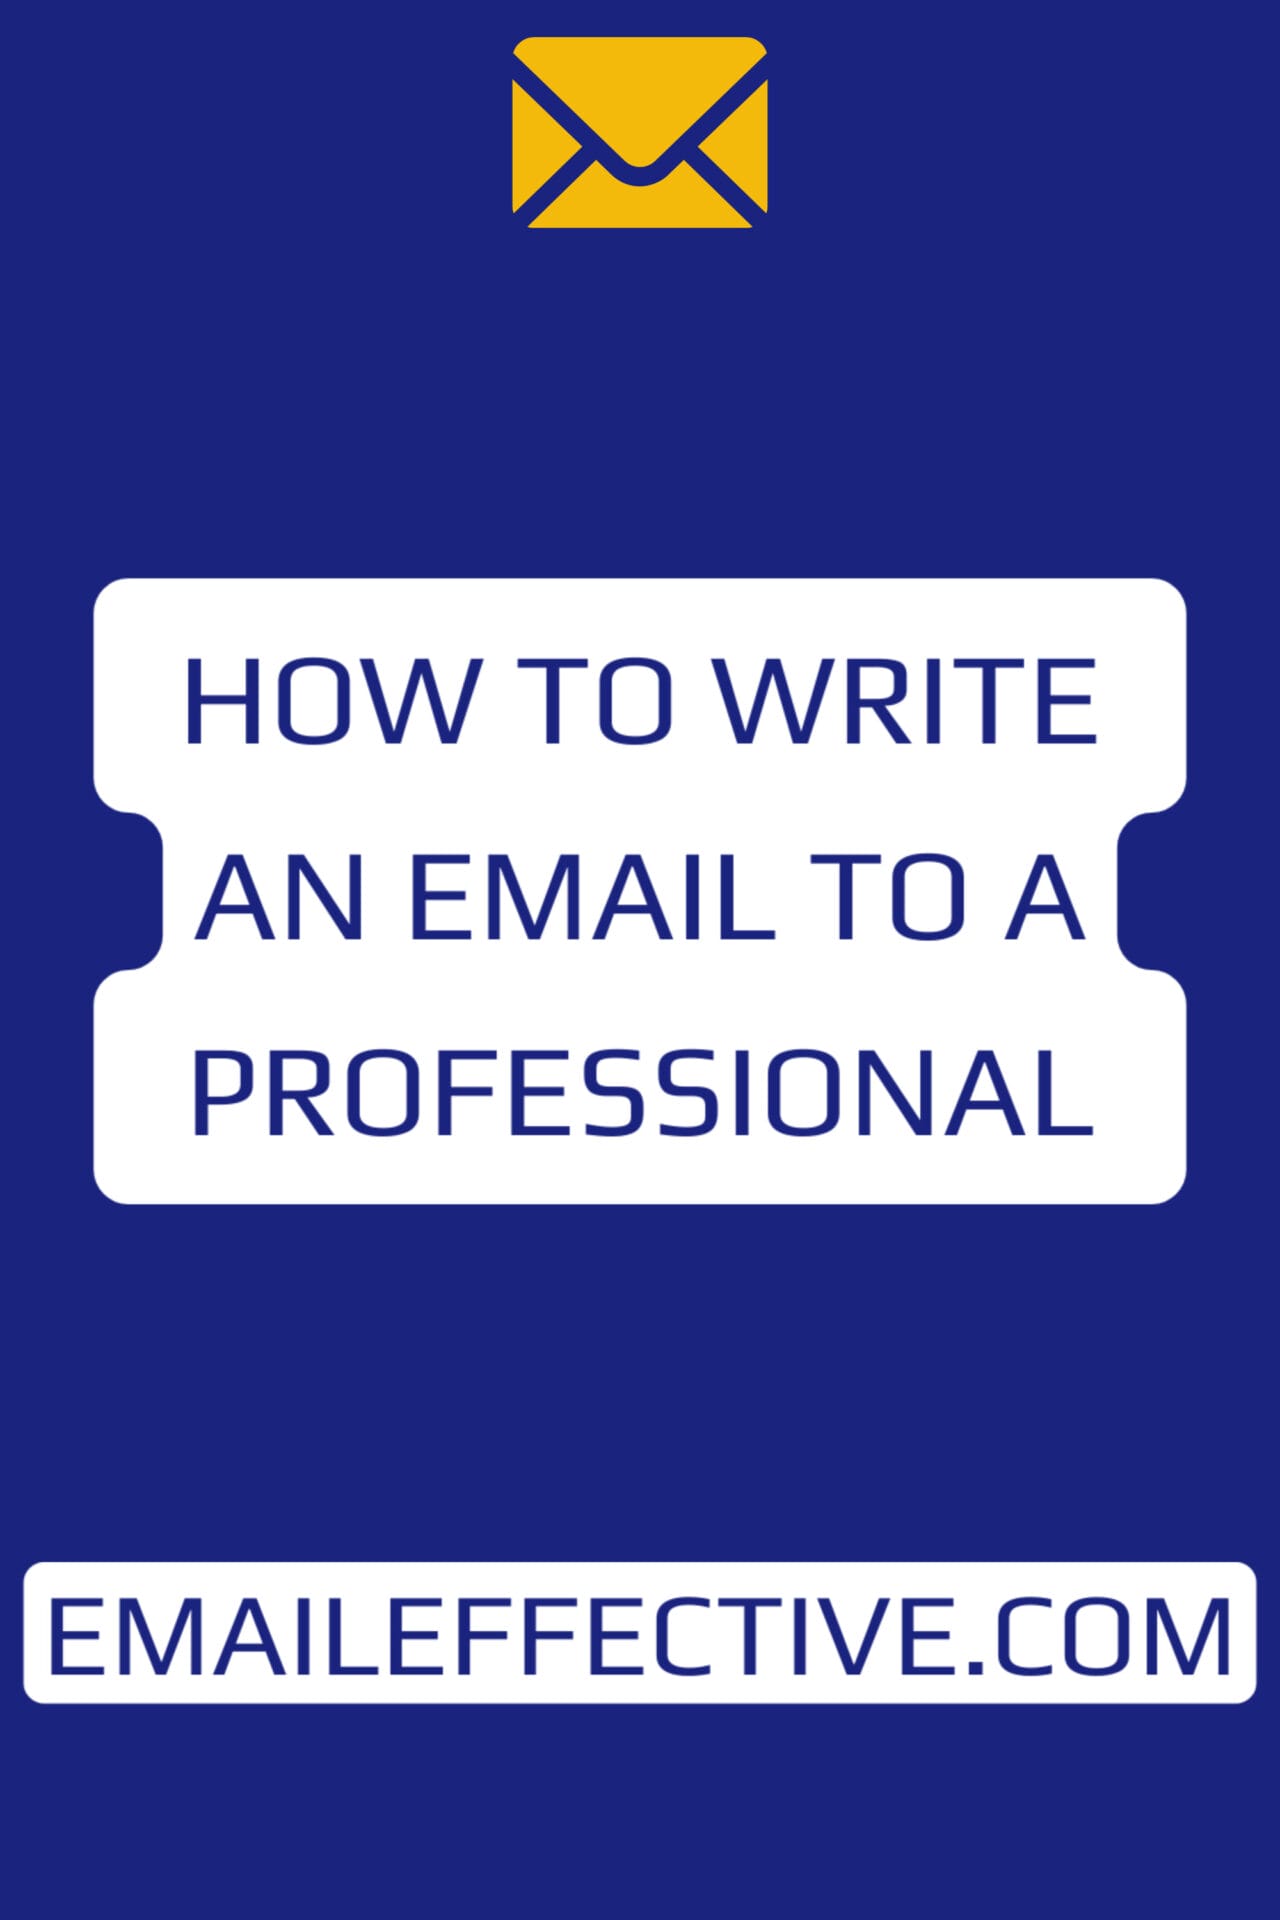 How to Write an Email to A Professional